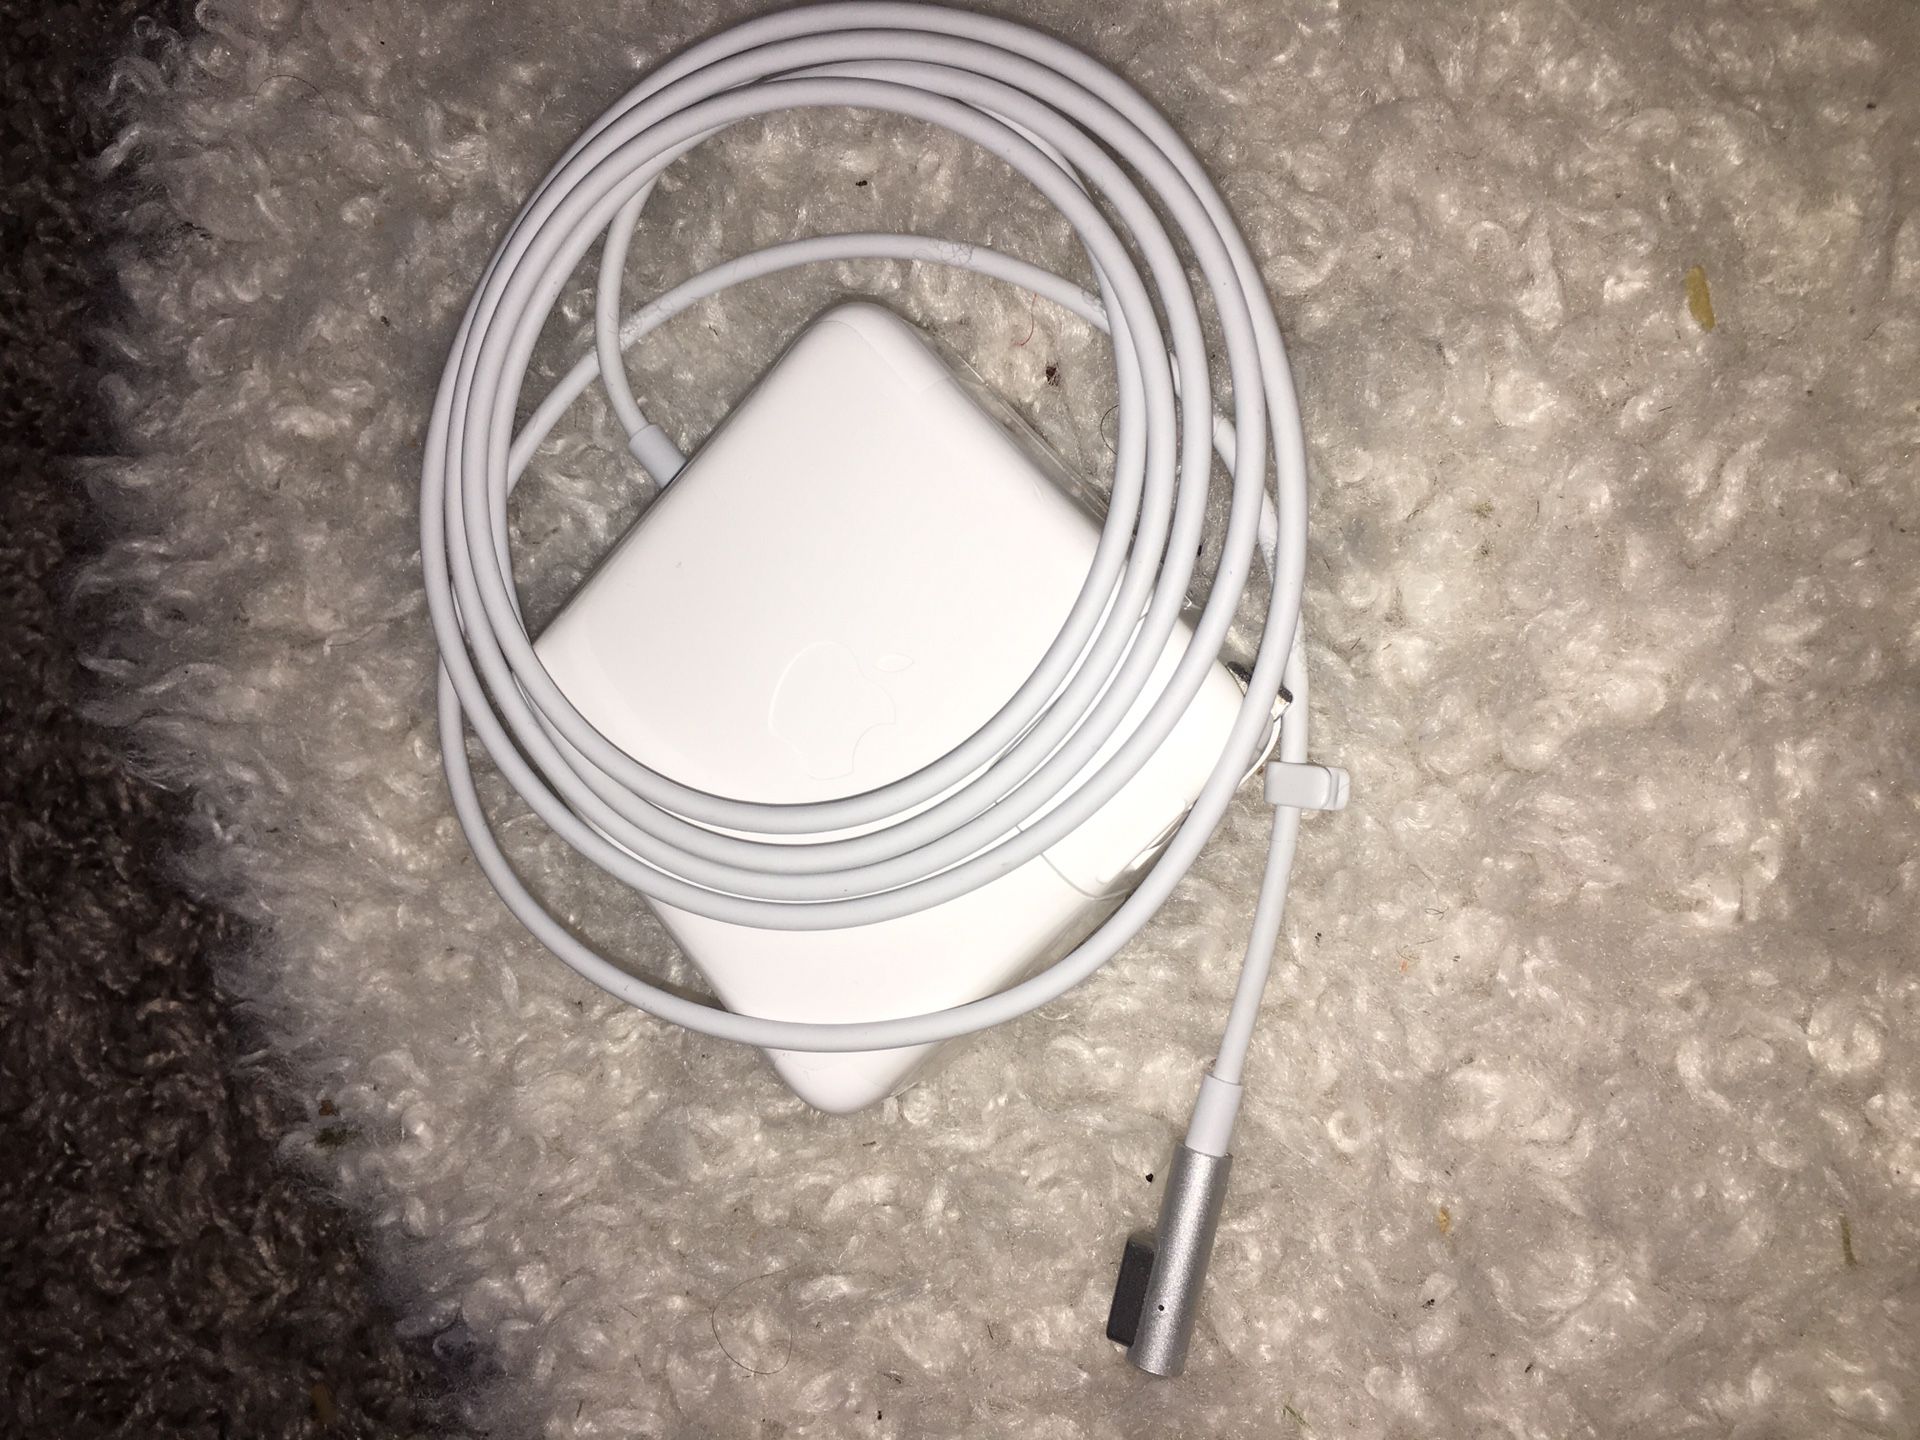 MacBook Pro Charger, Brand New*